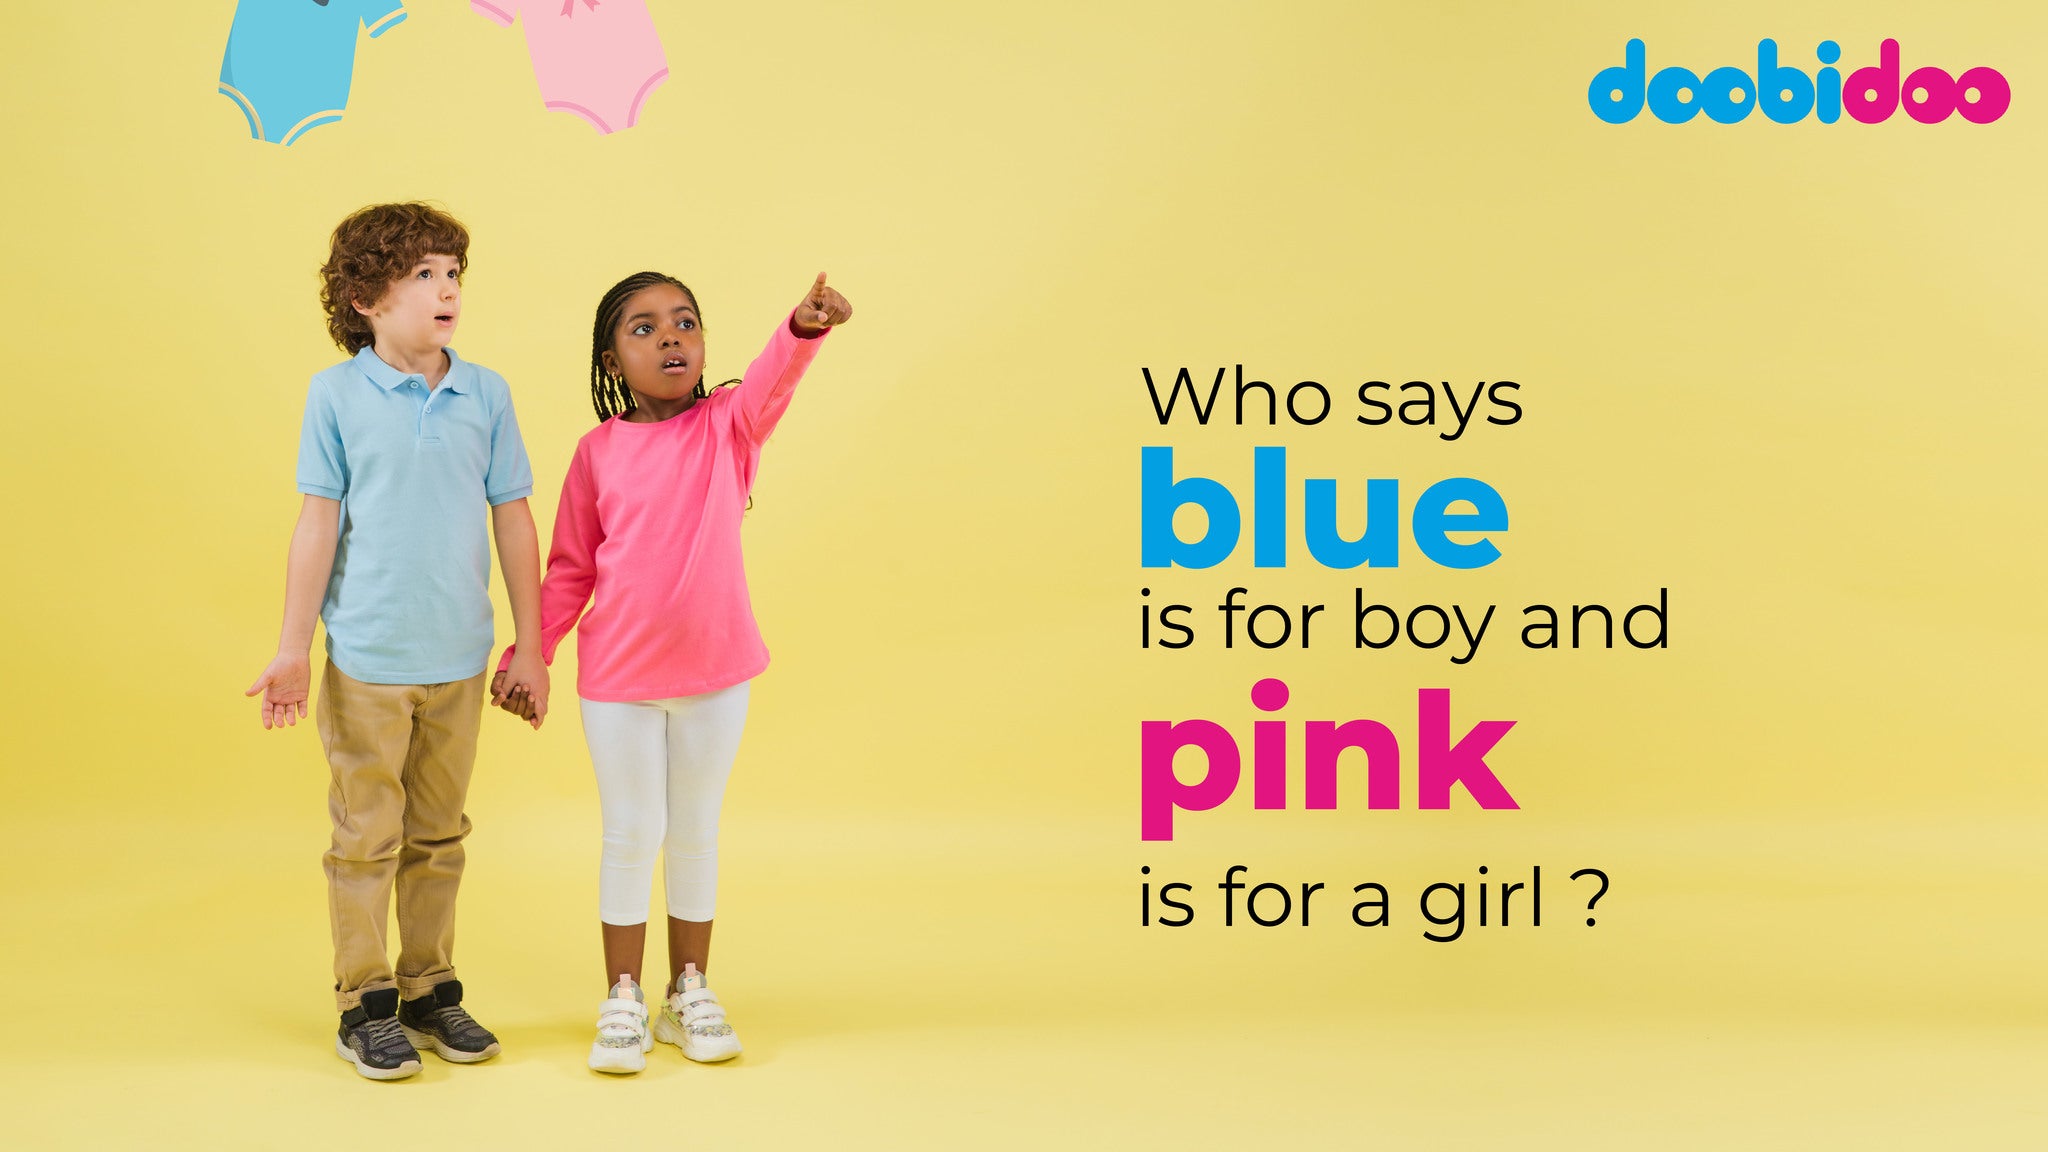 Who says blue is for boys and pink is for girls?